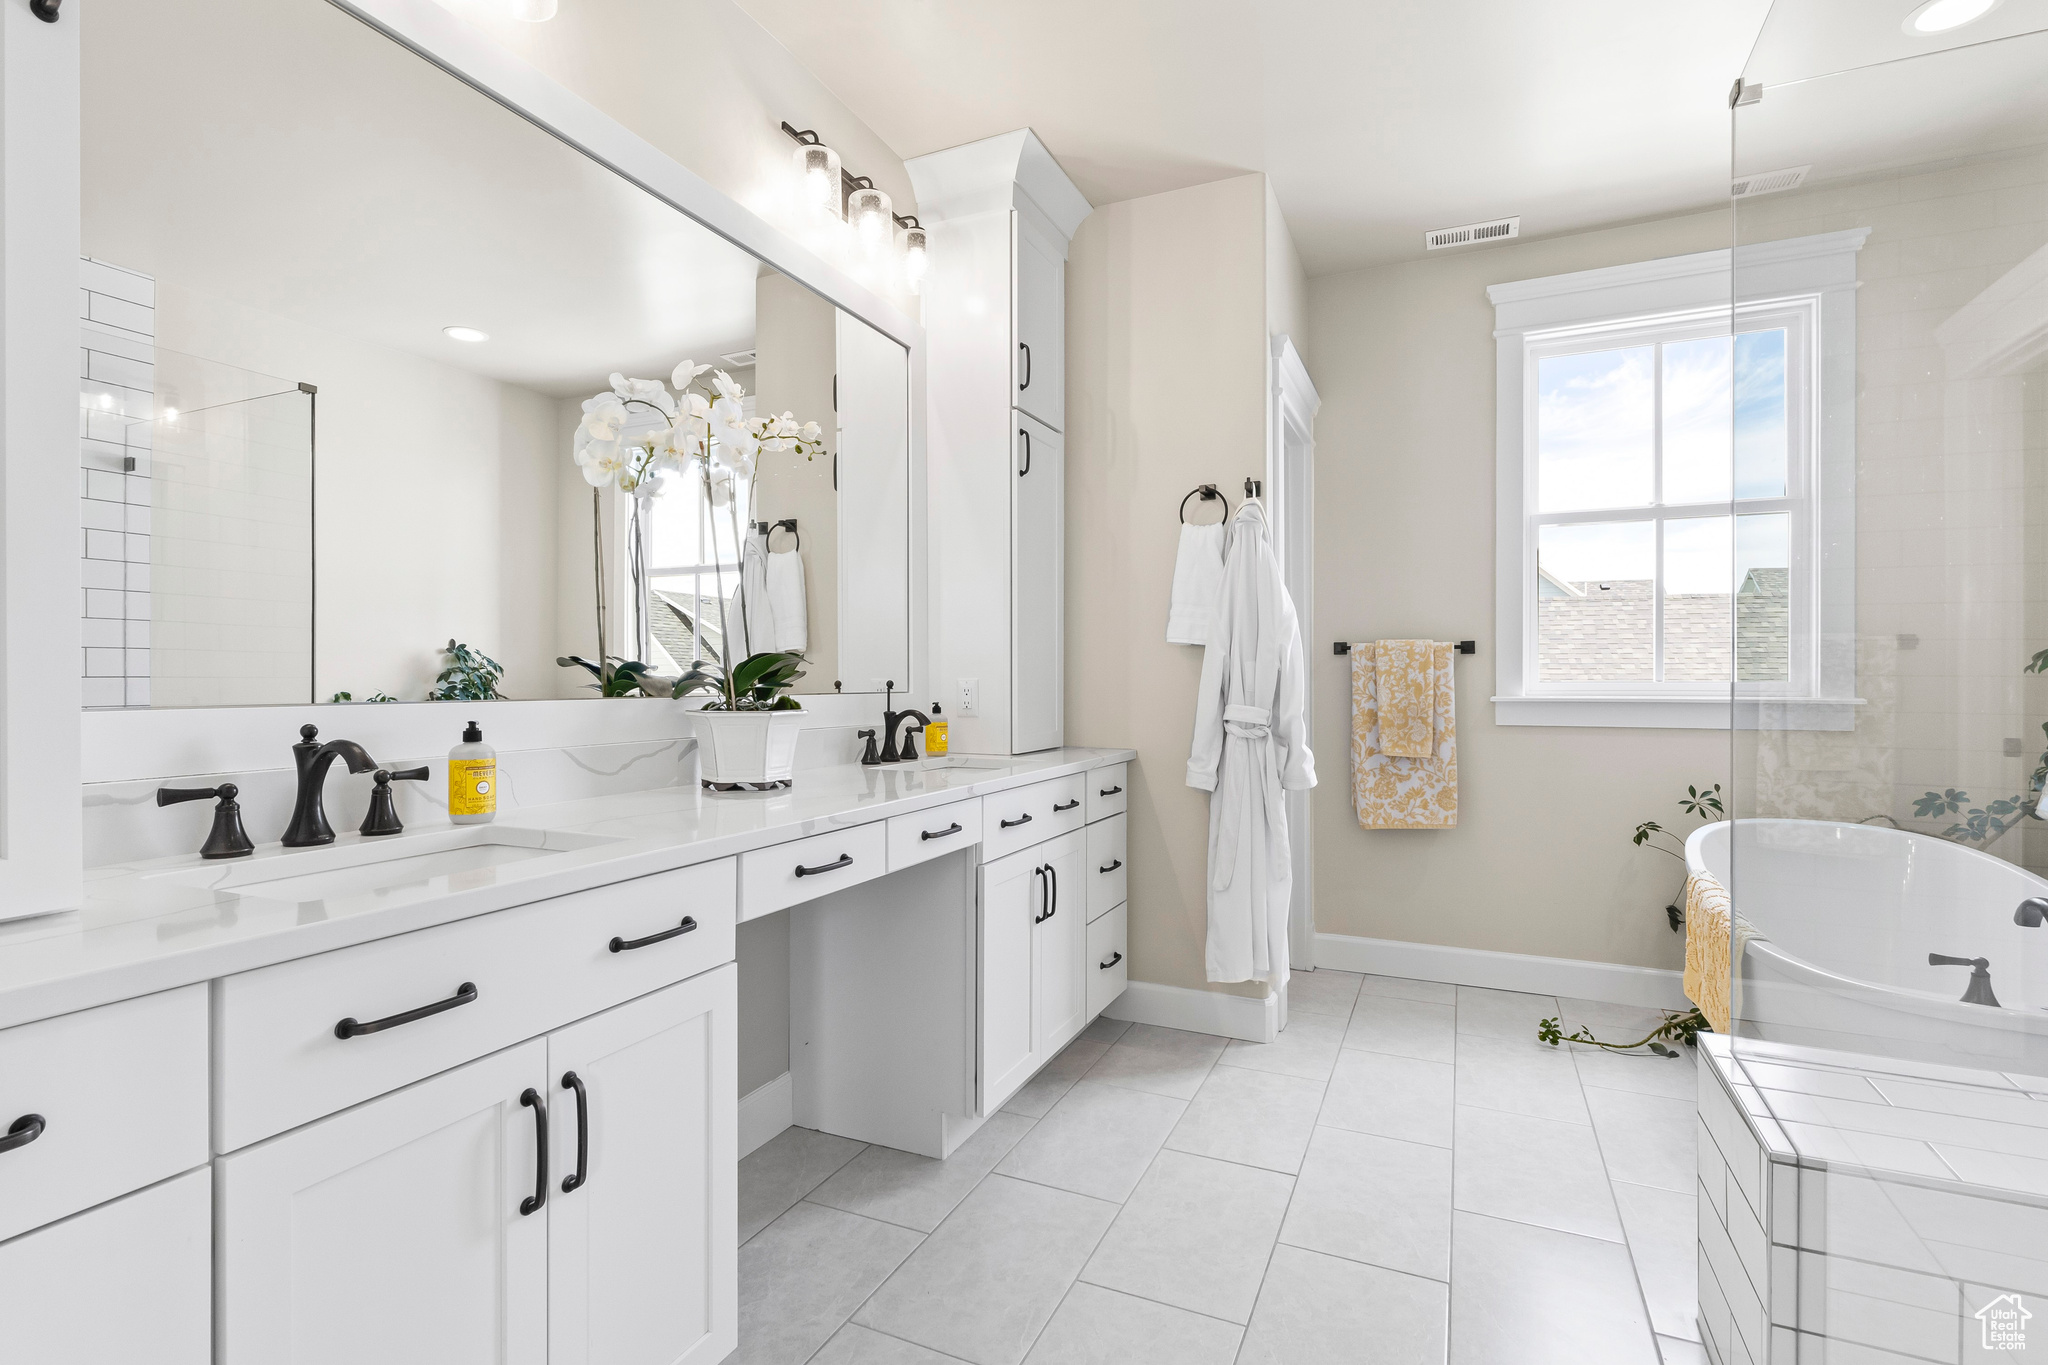 Master Bathroom with tile floors, separate shower and freestanding tub, and dual bowl vanity